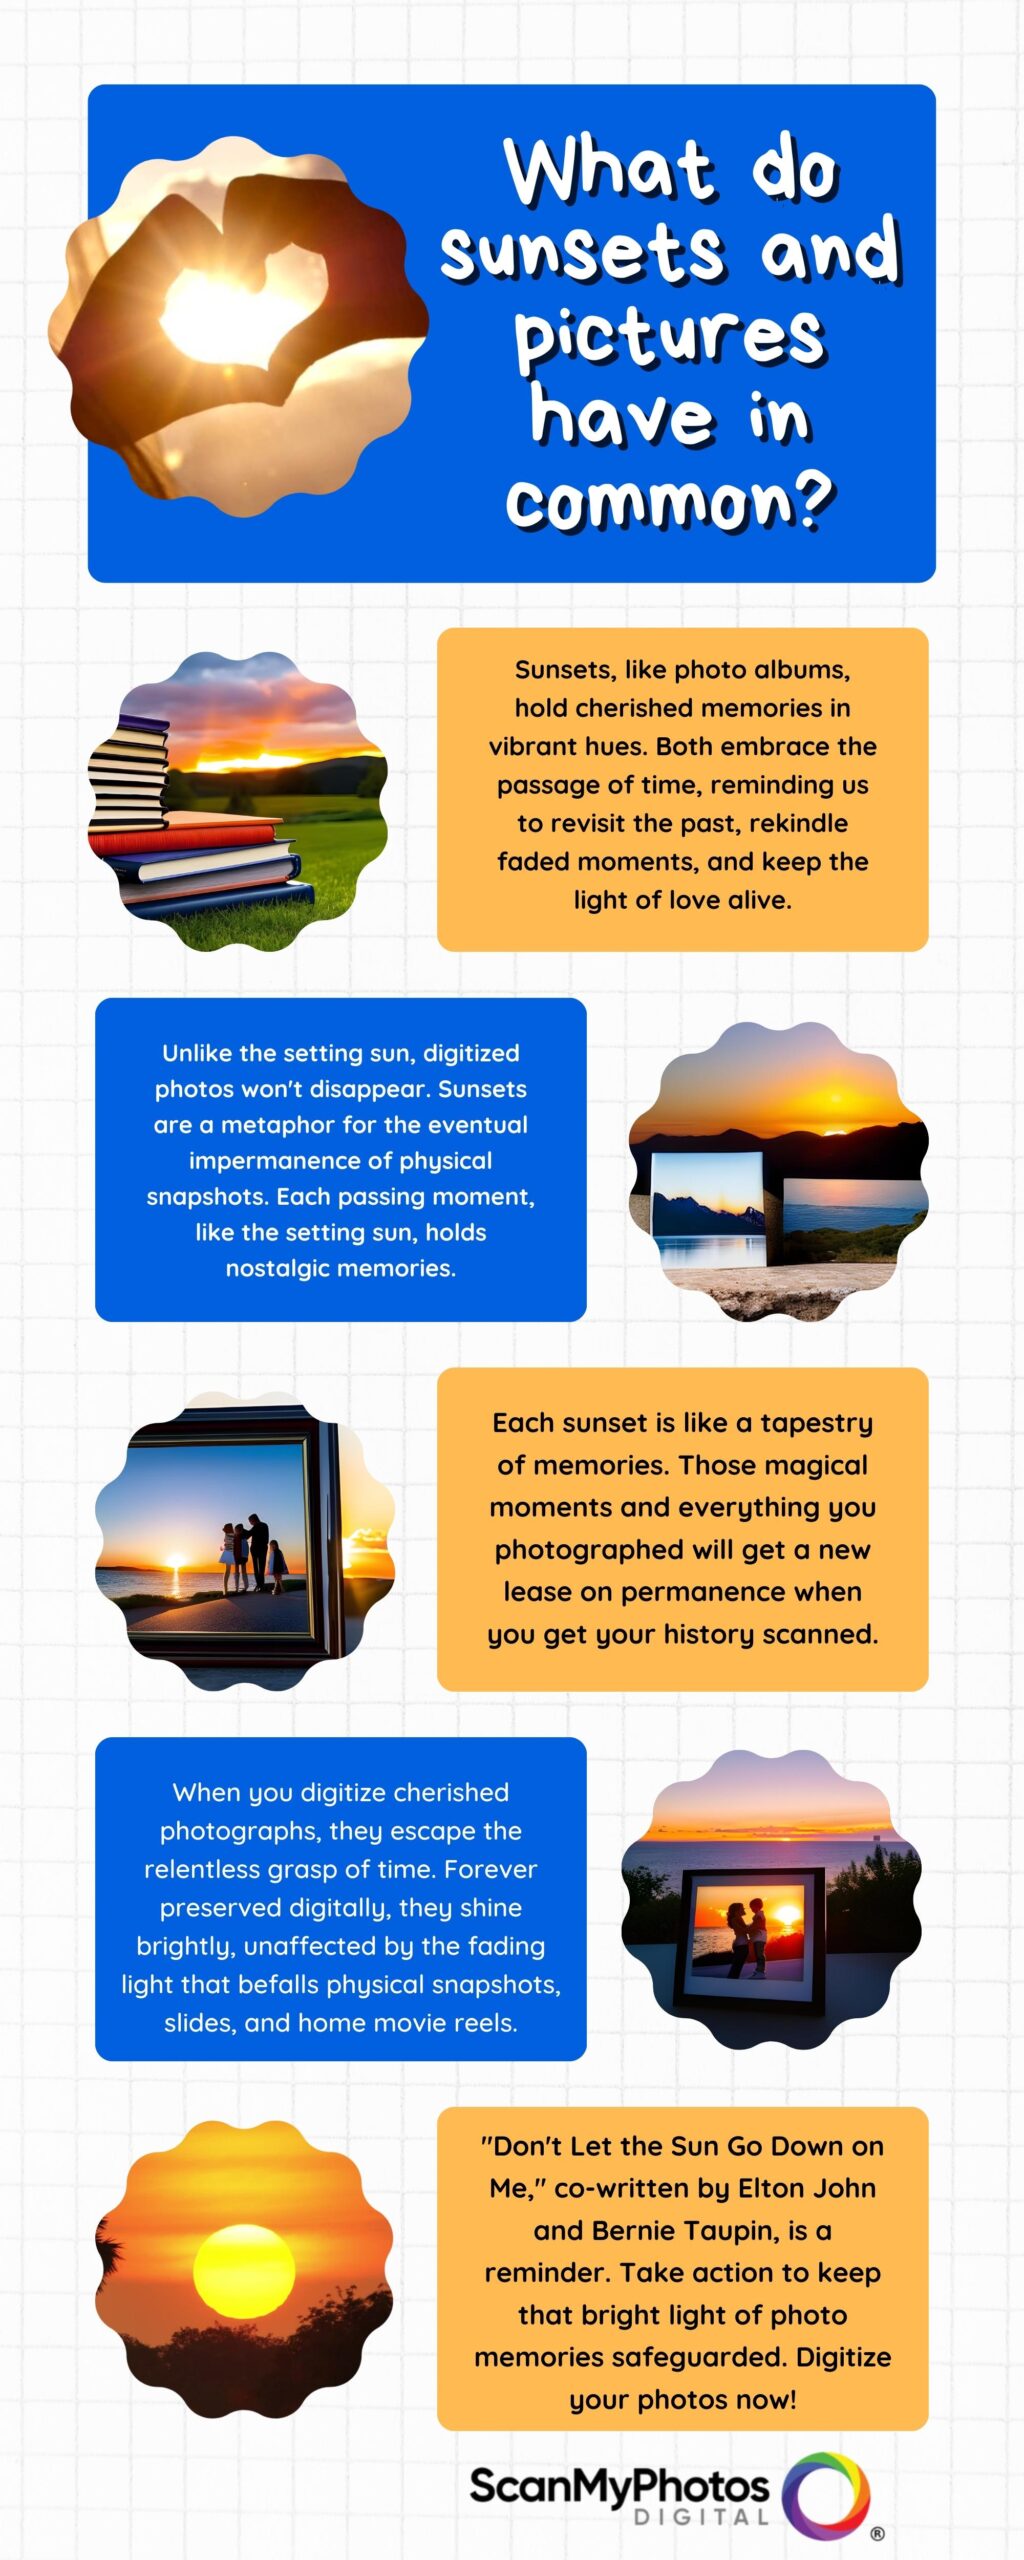 comparing sunsets to photographs